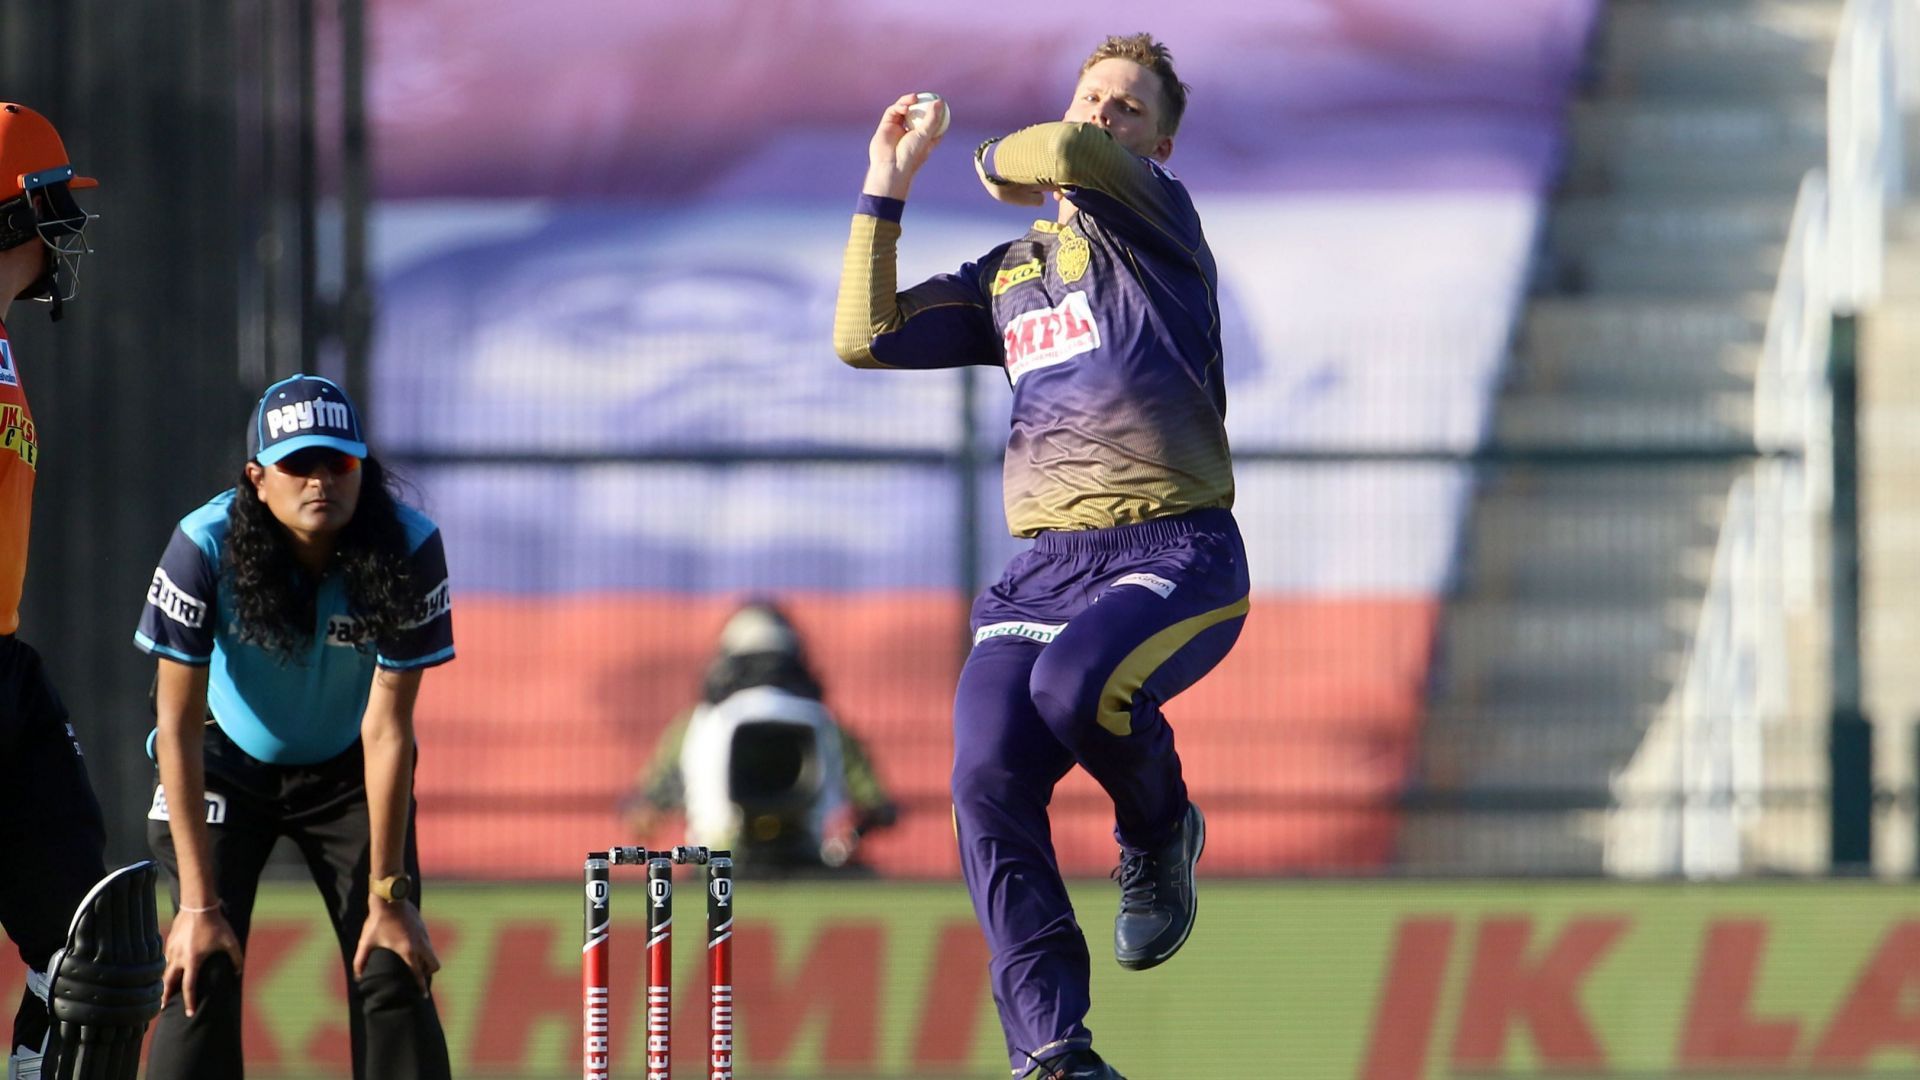 Lockie Ferguson is one of the most feared T20 bowlers currently